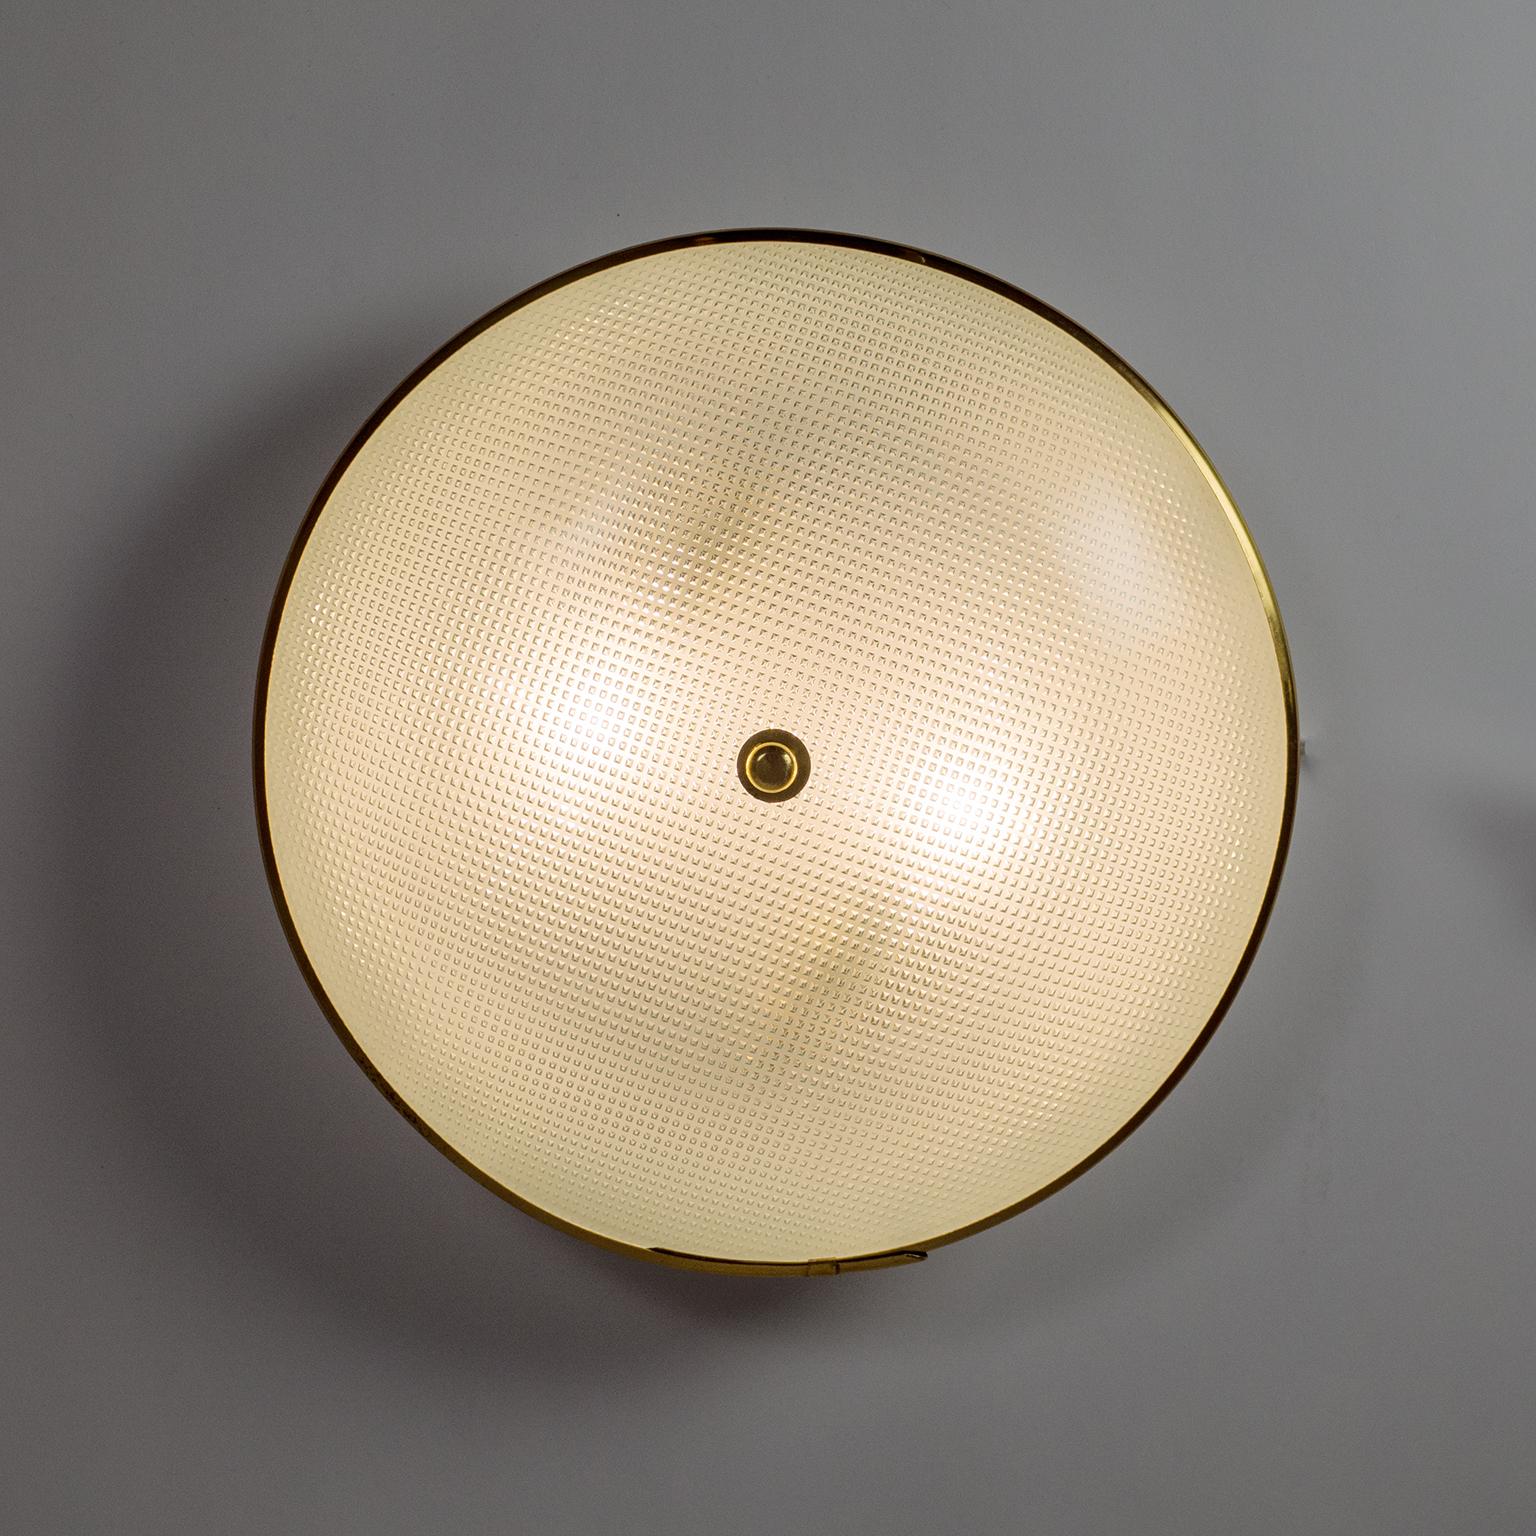 1950s Italian Saucer Ceiling or Wall Lights, Textured Glass and Brass 4